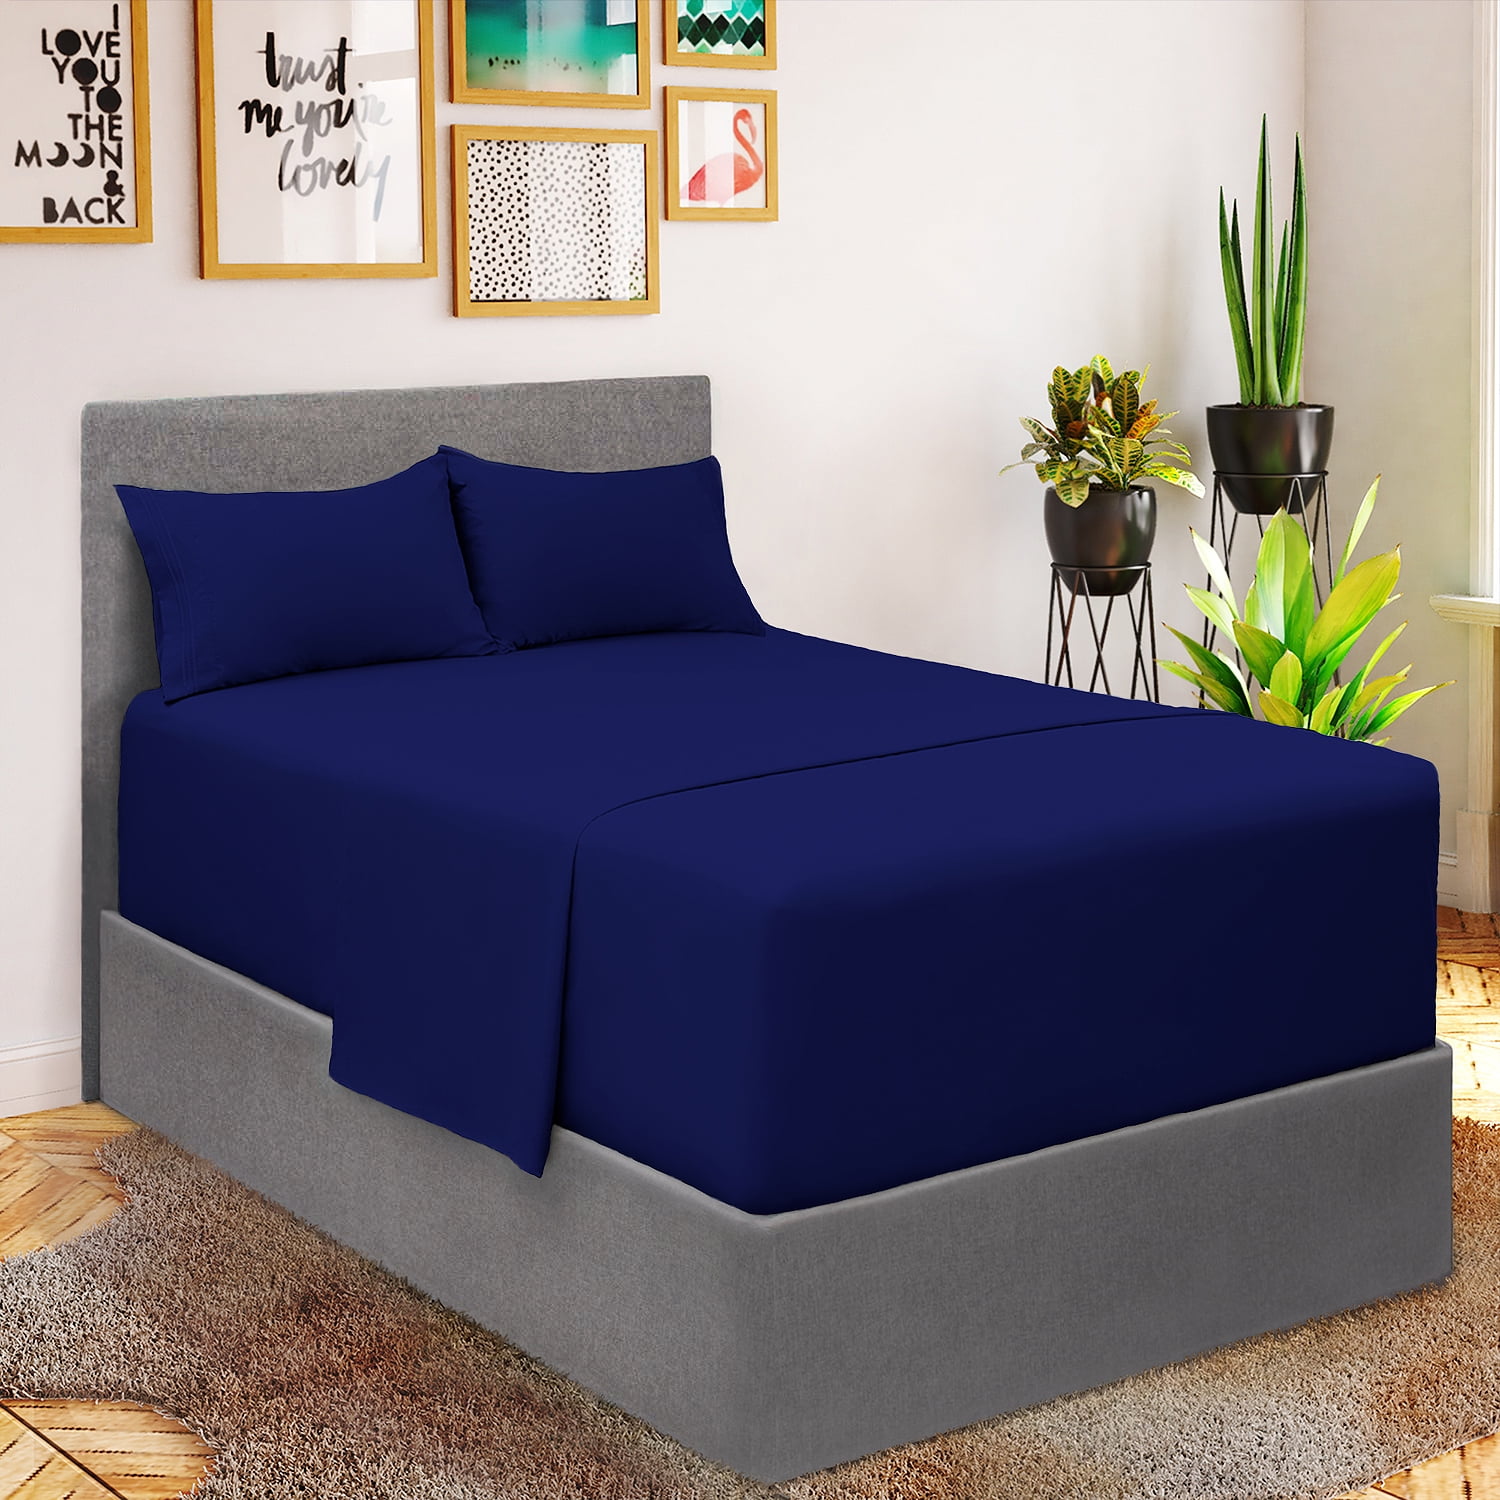 Luxury Plain Percale Cotton Double Bed Mattress Elastic Fitted Sheet Royal Blue 